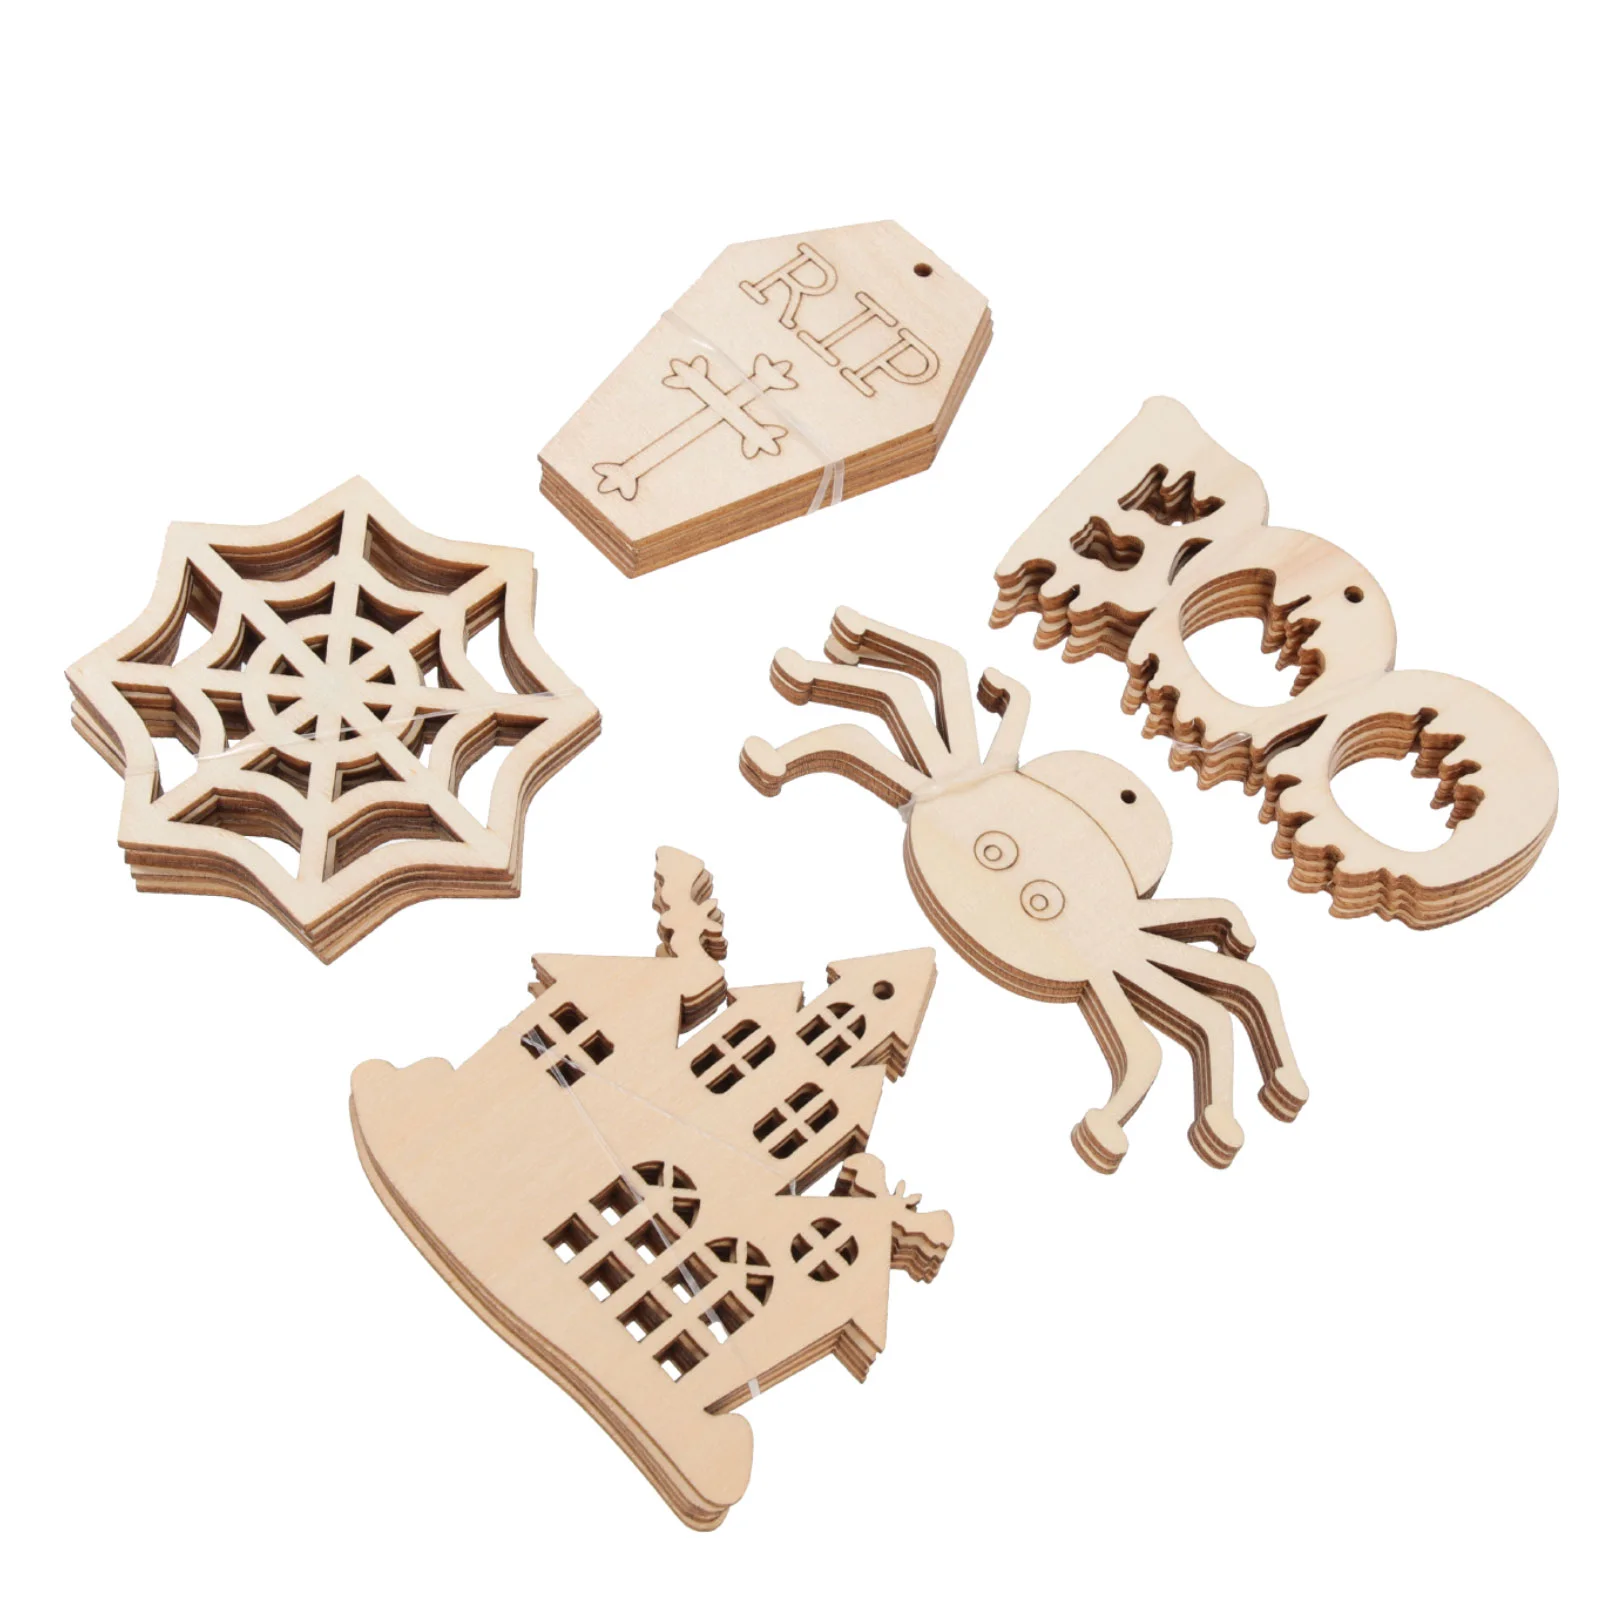 

Wooden Wood Cutouts Slices Diy Crafts Chips Blank Ornaments Tags Spider Unfinished Shapes Graffiti Tree Gift Cutout Hanging